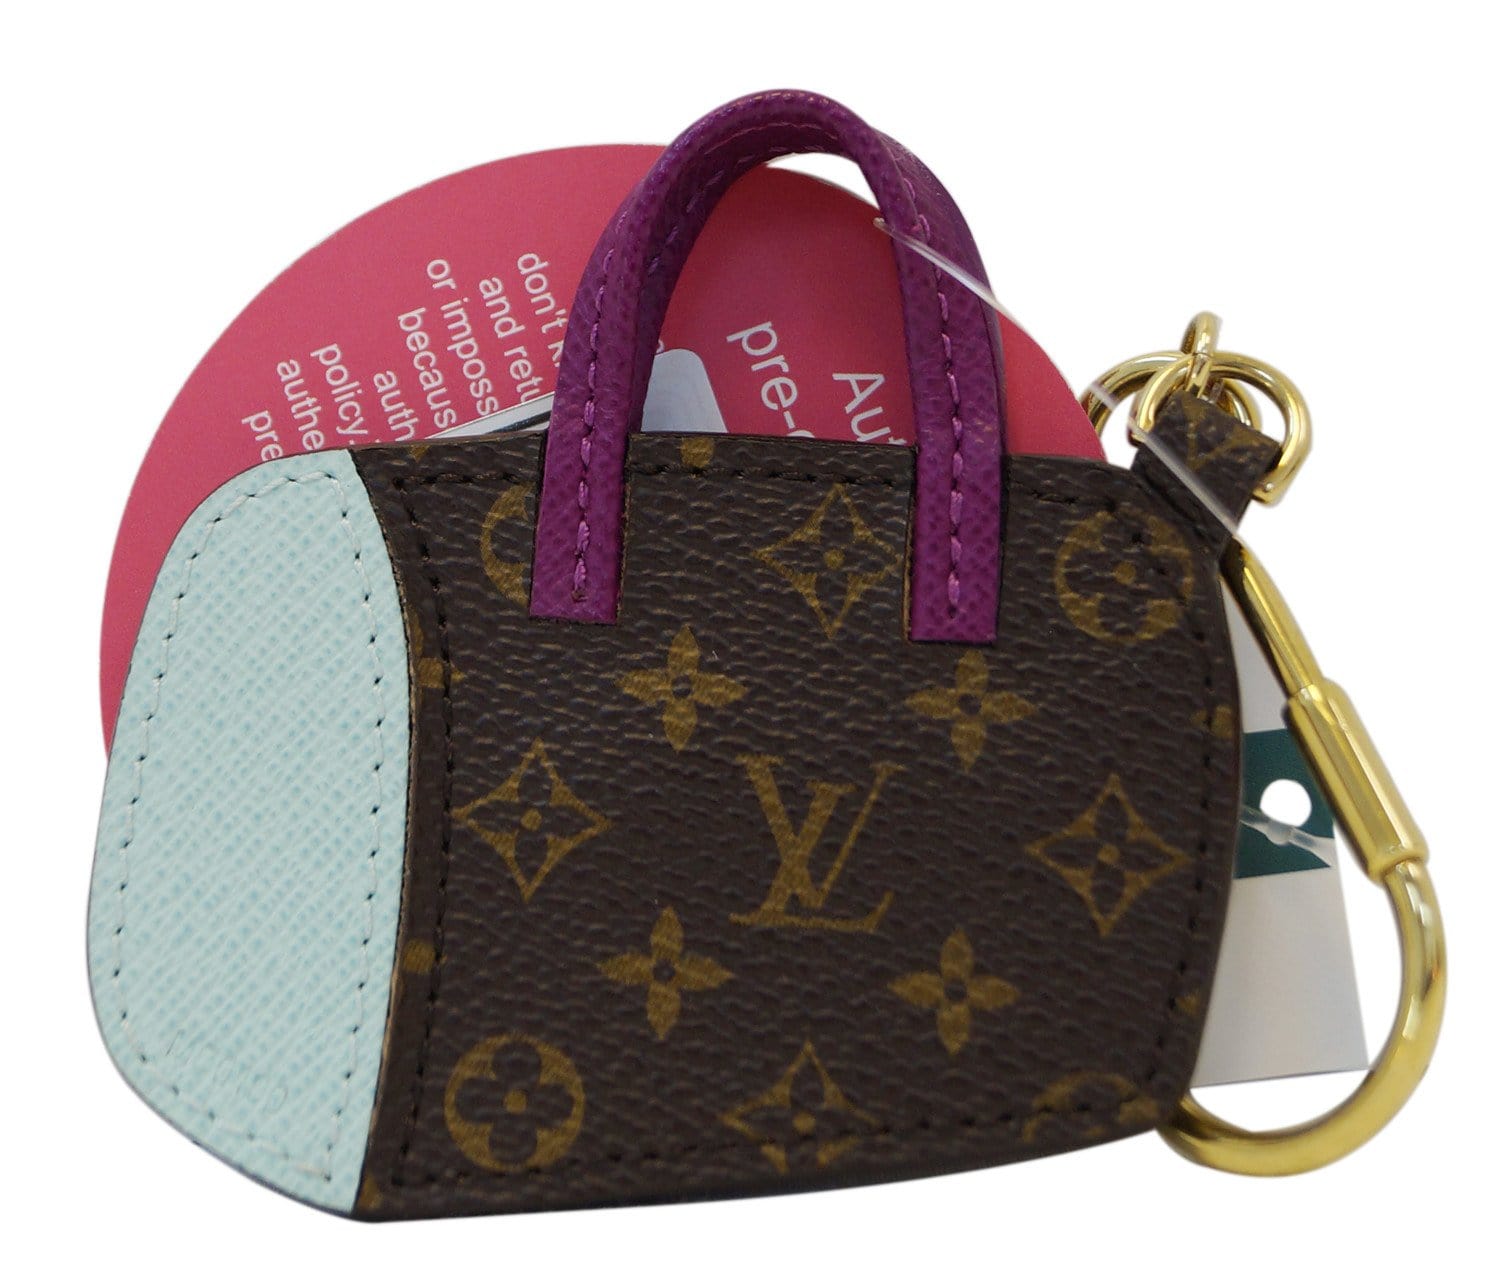 Don't care for the bag charm, but I LOVE the color of the patina on this bag.  Louis Vuitton Speedy Bag